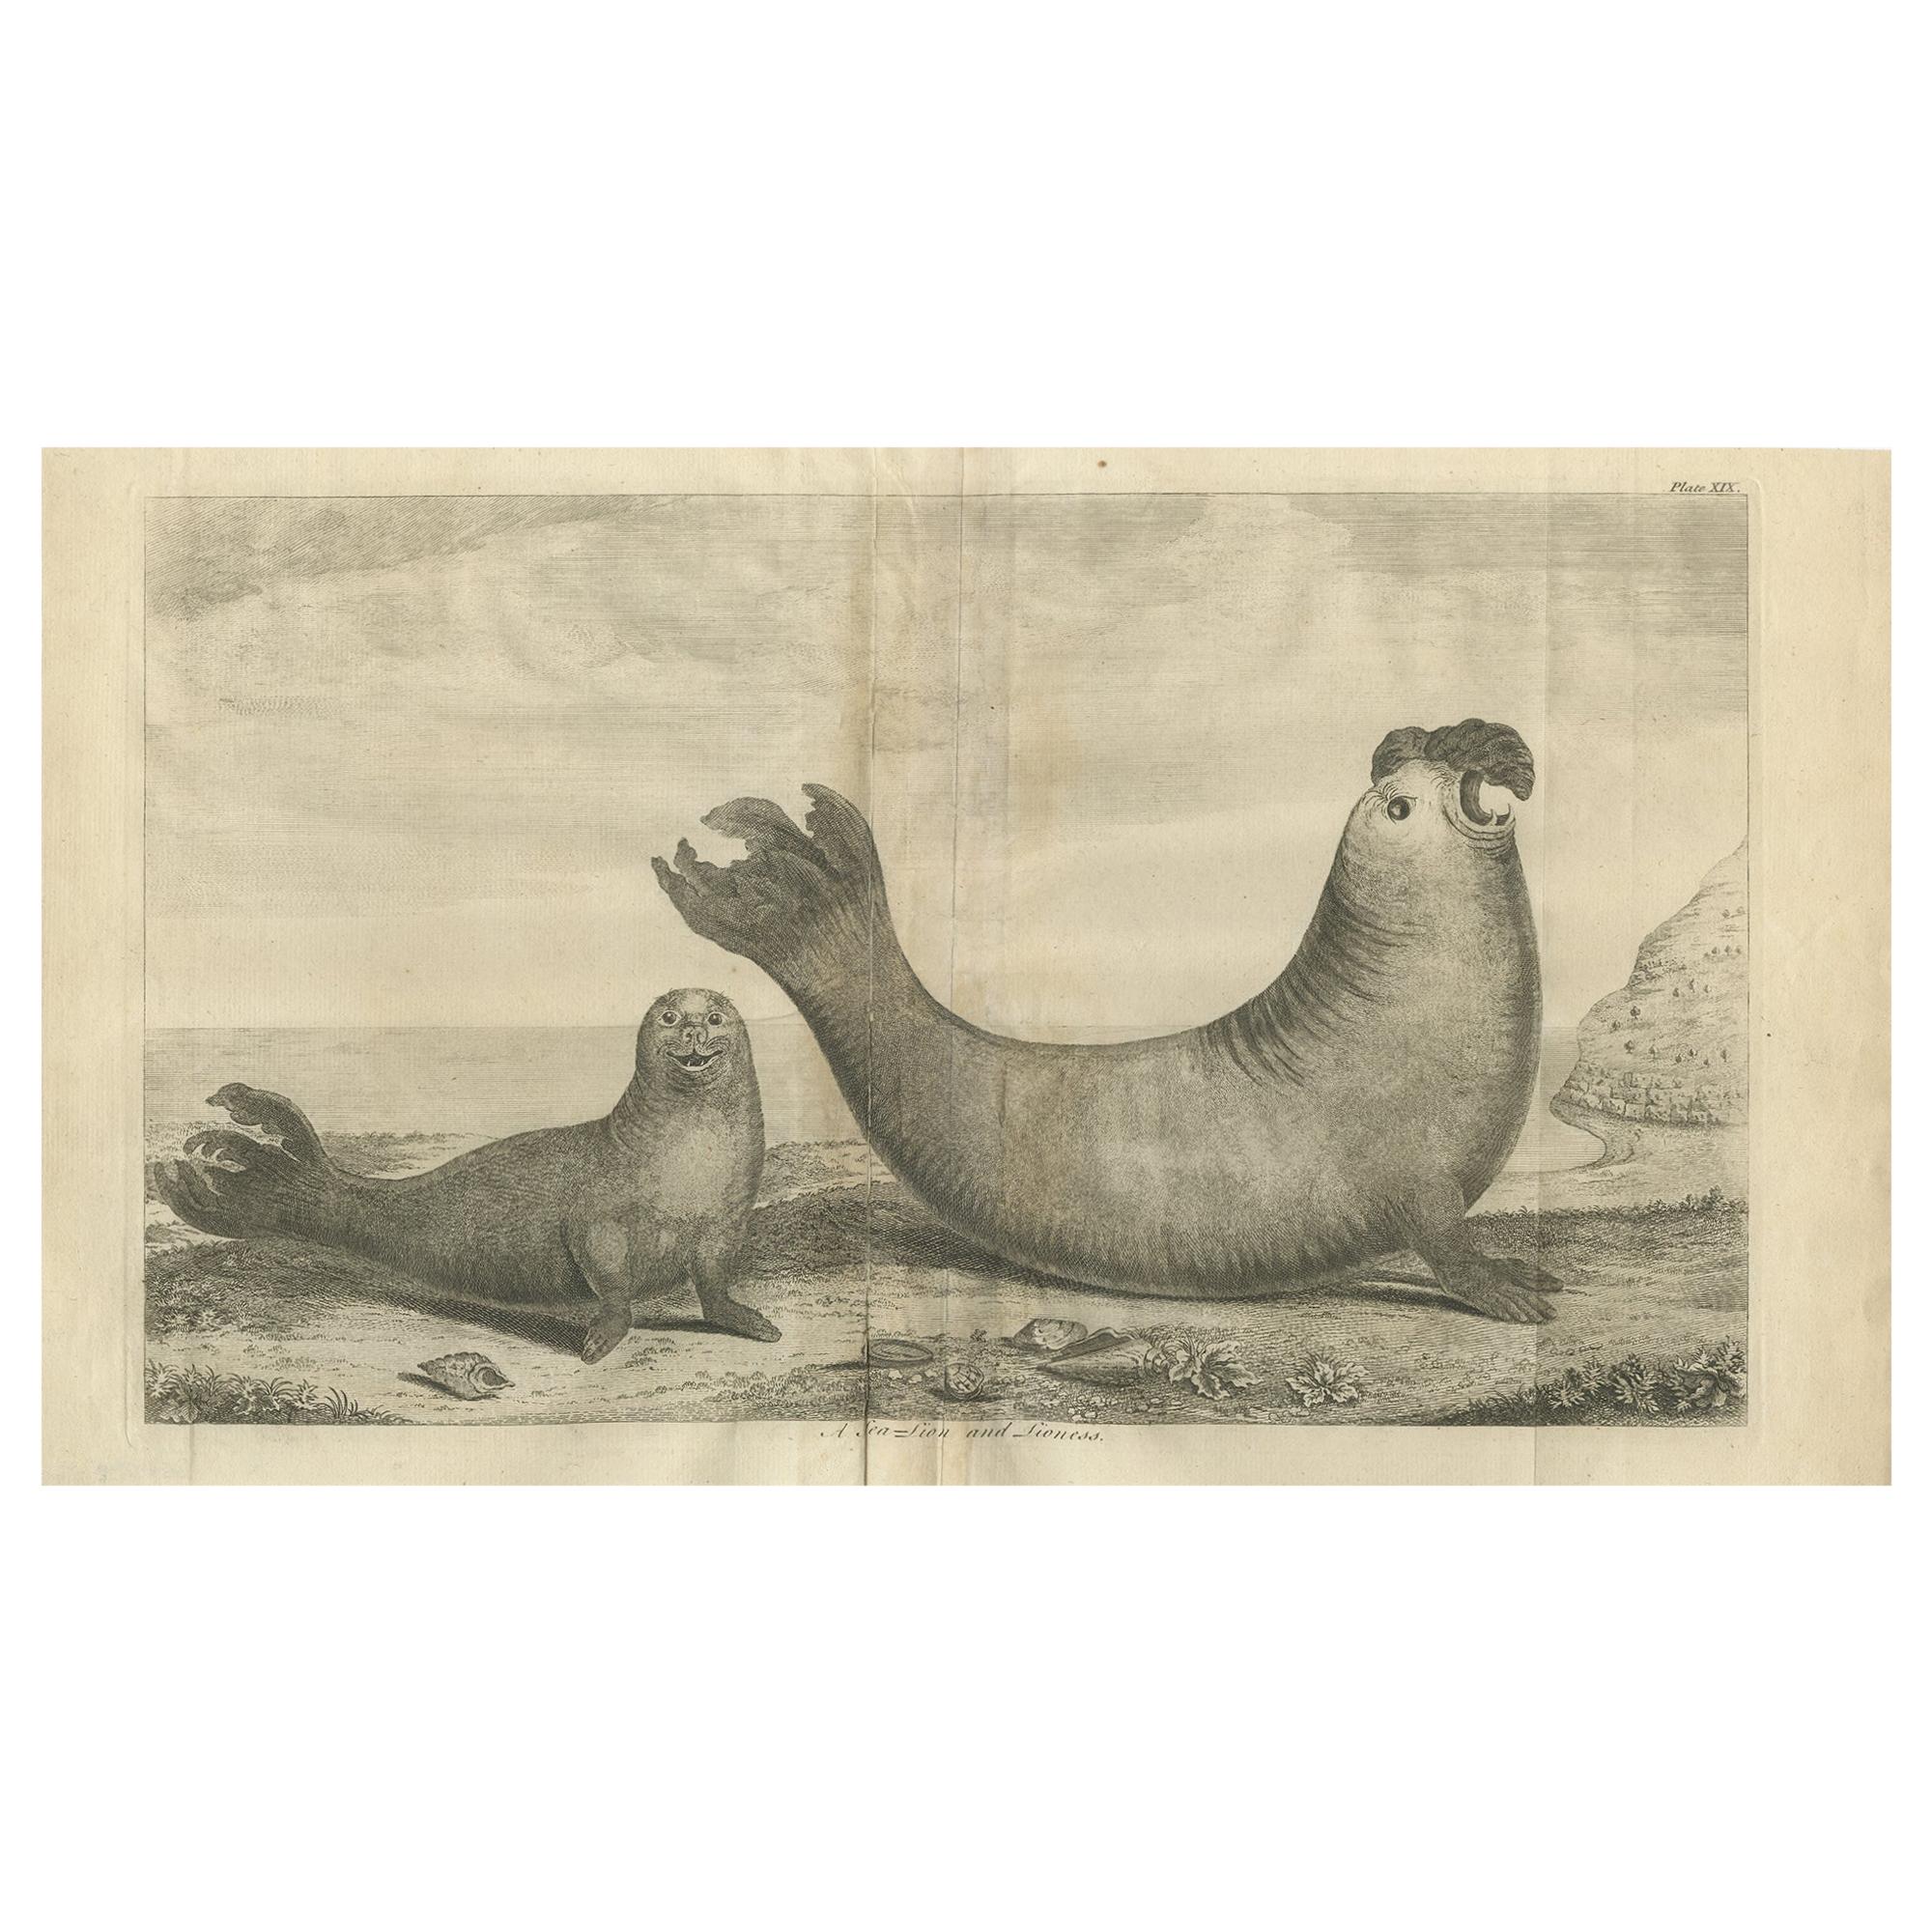 Antique Print of Two Sea Lions on the Shore of Juan Fernandes by Anson, '1749'